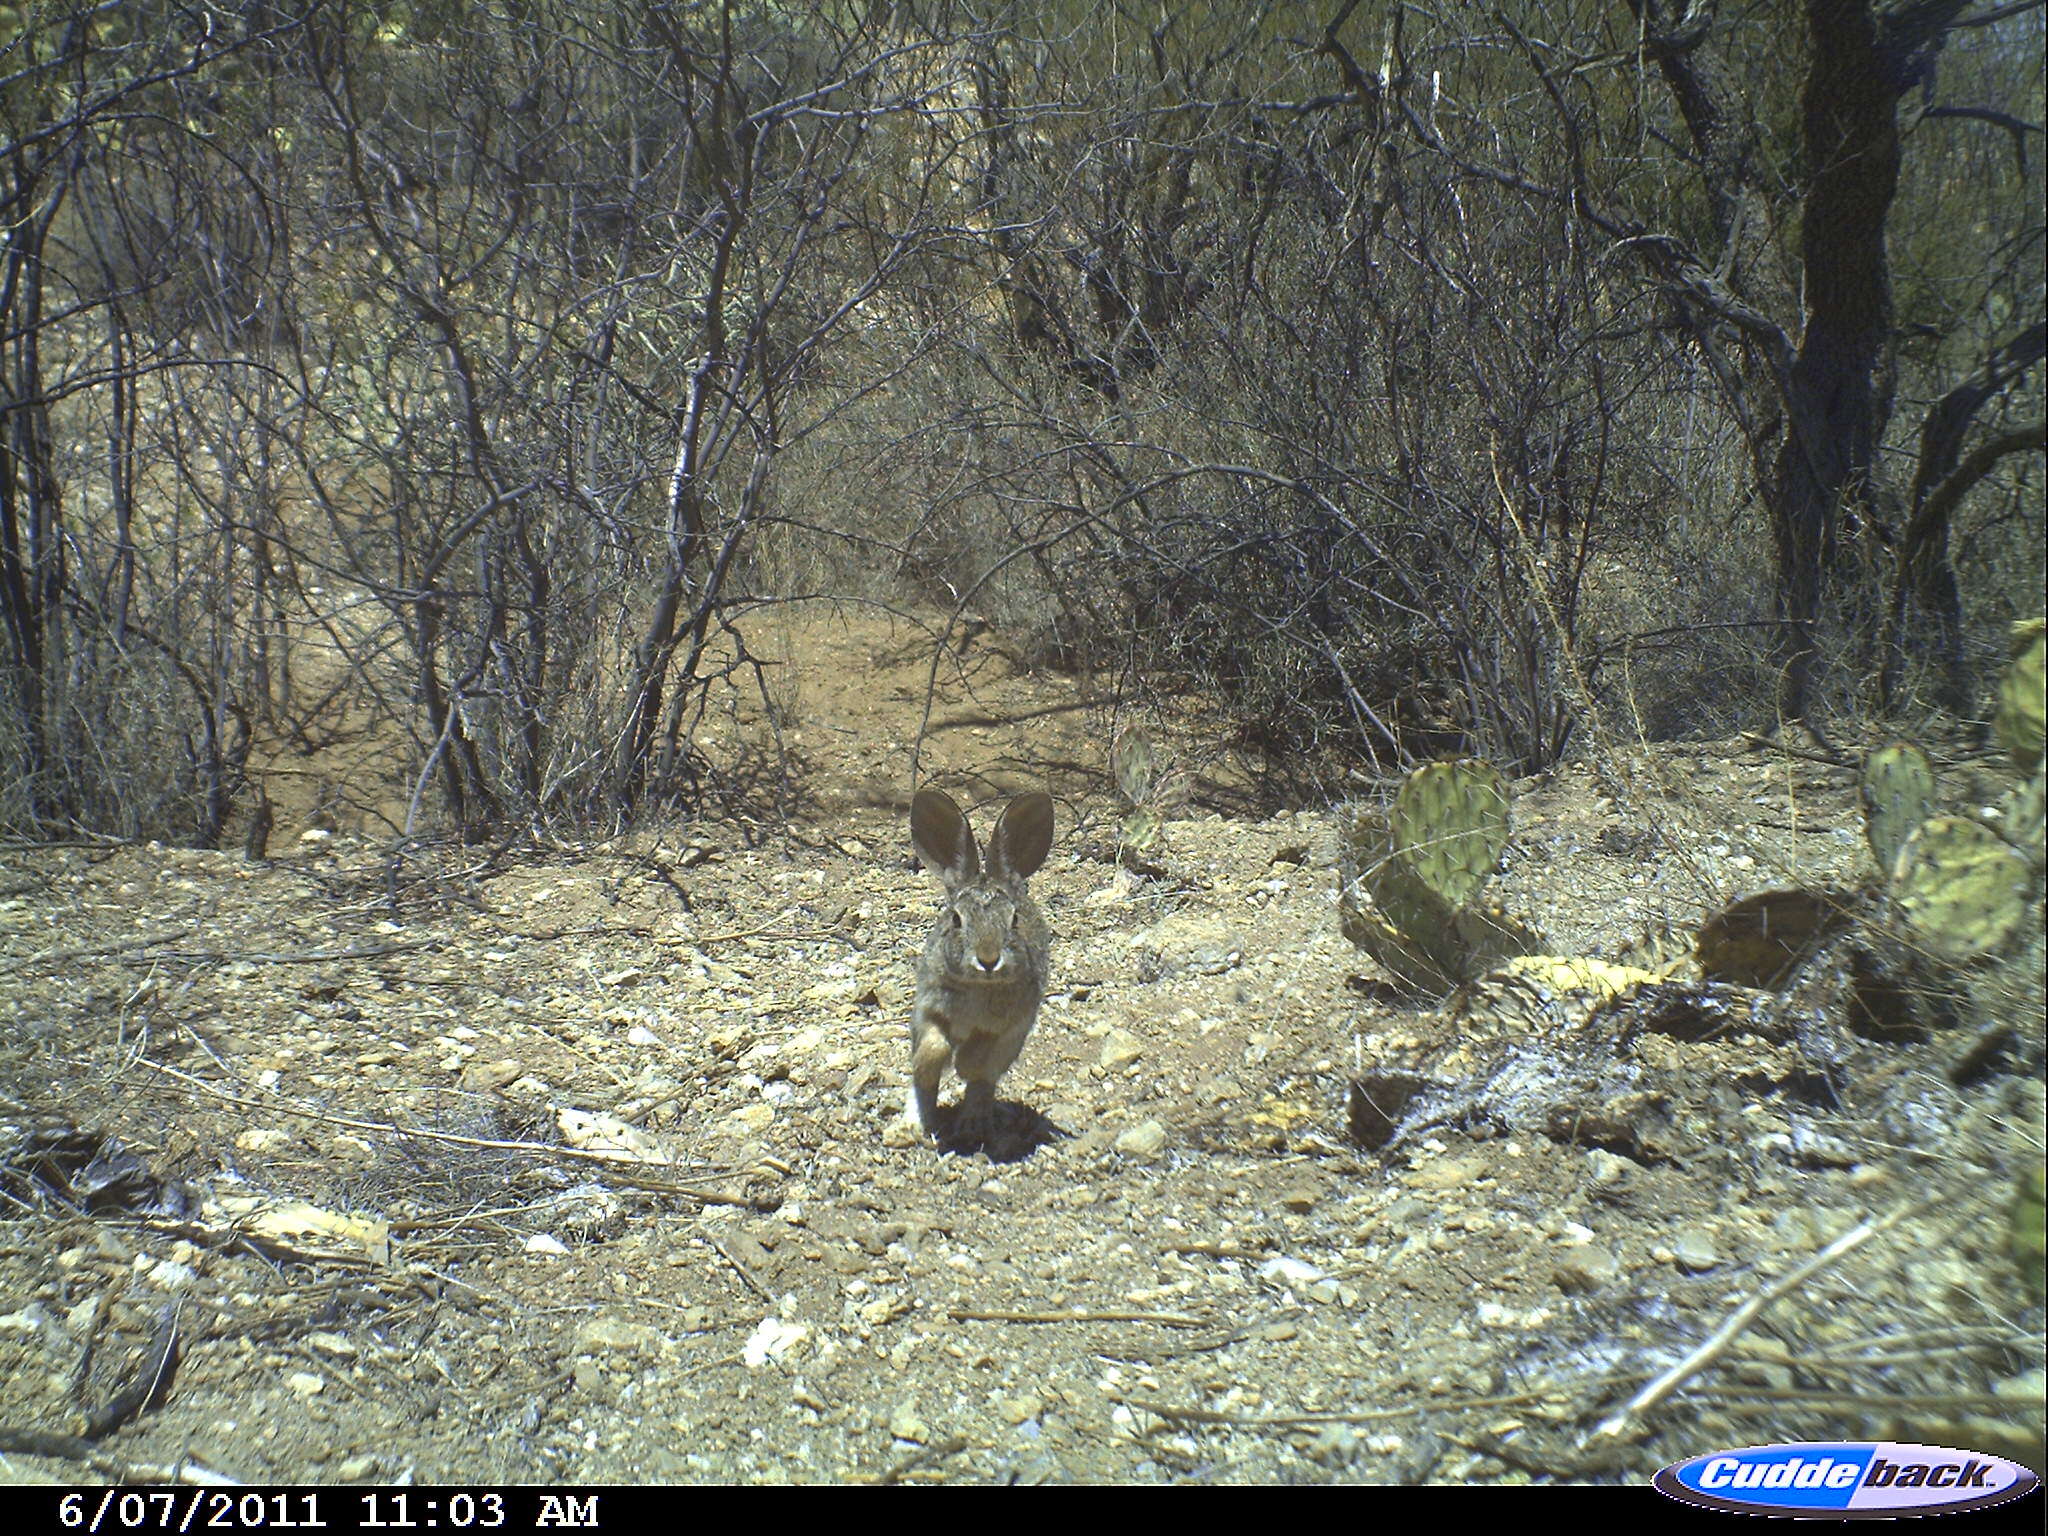 Image of Cottontail rabbit